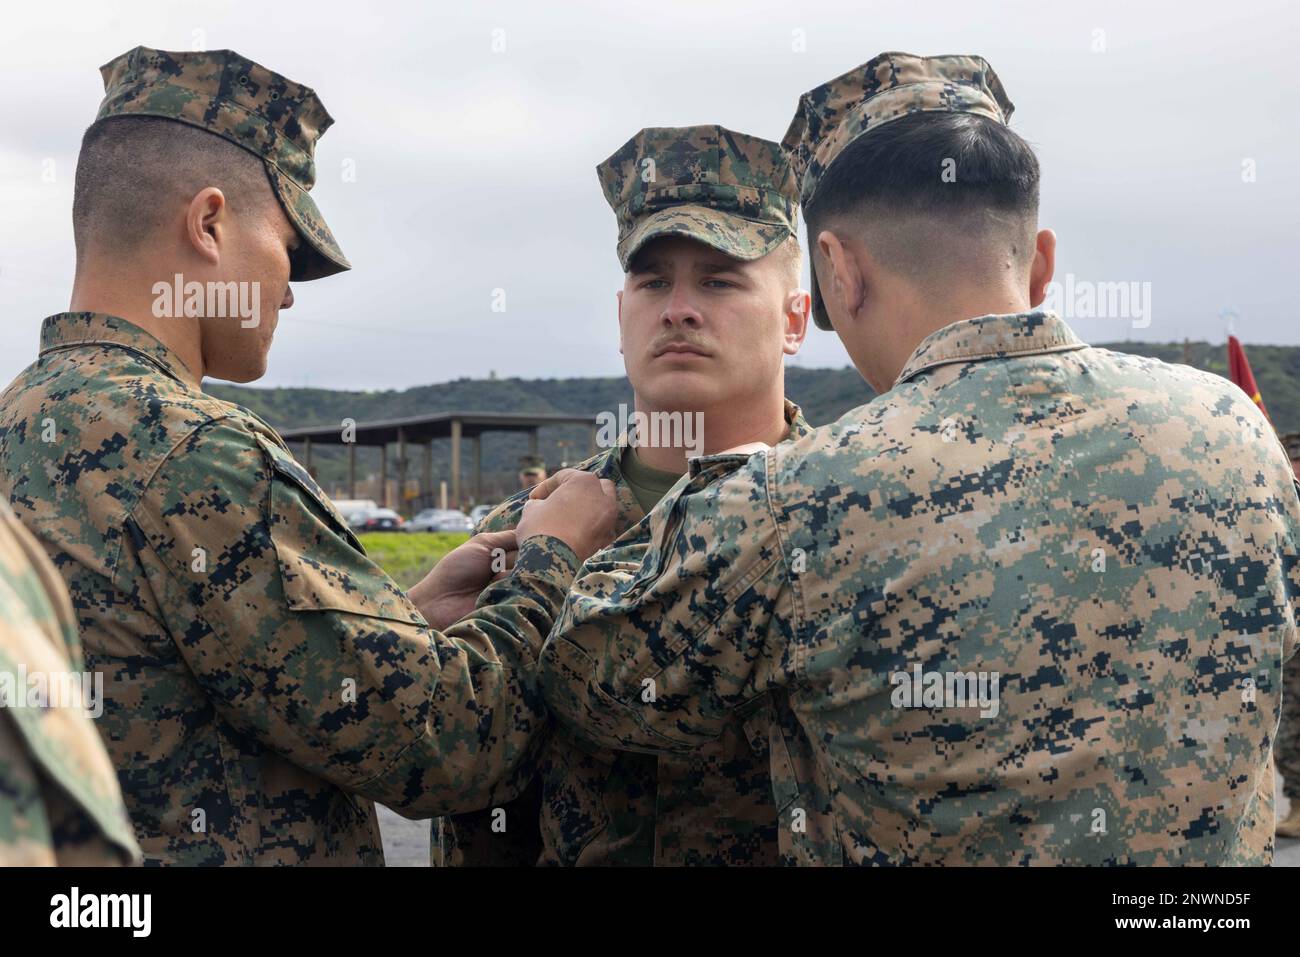 U.S. Marine Corps Lance Cpl. Connor Croghan (center), a water support technician, is meritoriously promoted to the rank of corporal by Staff Sgt. Andre Velez (left), a water support technician, and Cpl. Daniel Long, an electrician, all with Marine Wing Support Squadron (MWSS) 372, Marine Air Control Group 38, 3rd Marine Aircraft Wing, on Camp Pendleton, California, Jan. 30, 2023. Marines who are meritoriously promoted display a high level of performance and outstanding leadership that significantly impacts mission accomplishment. Croghan is a Denham Springs, Louisiana, native; Velez is a San A Stock Photo